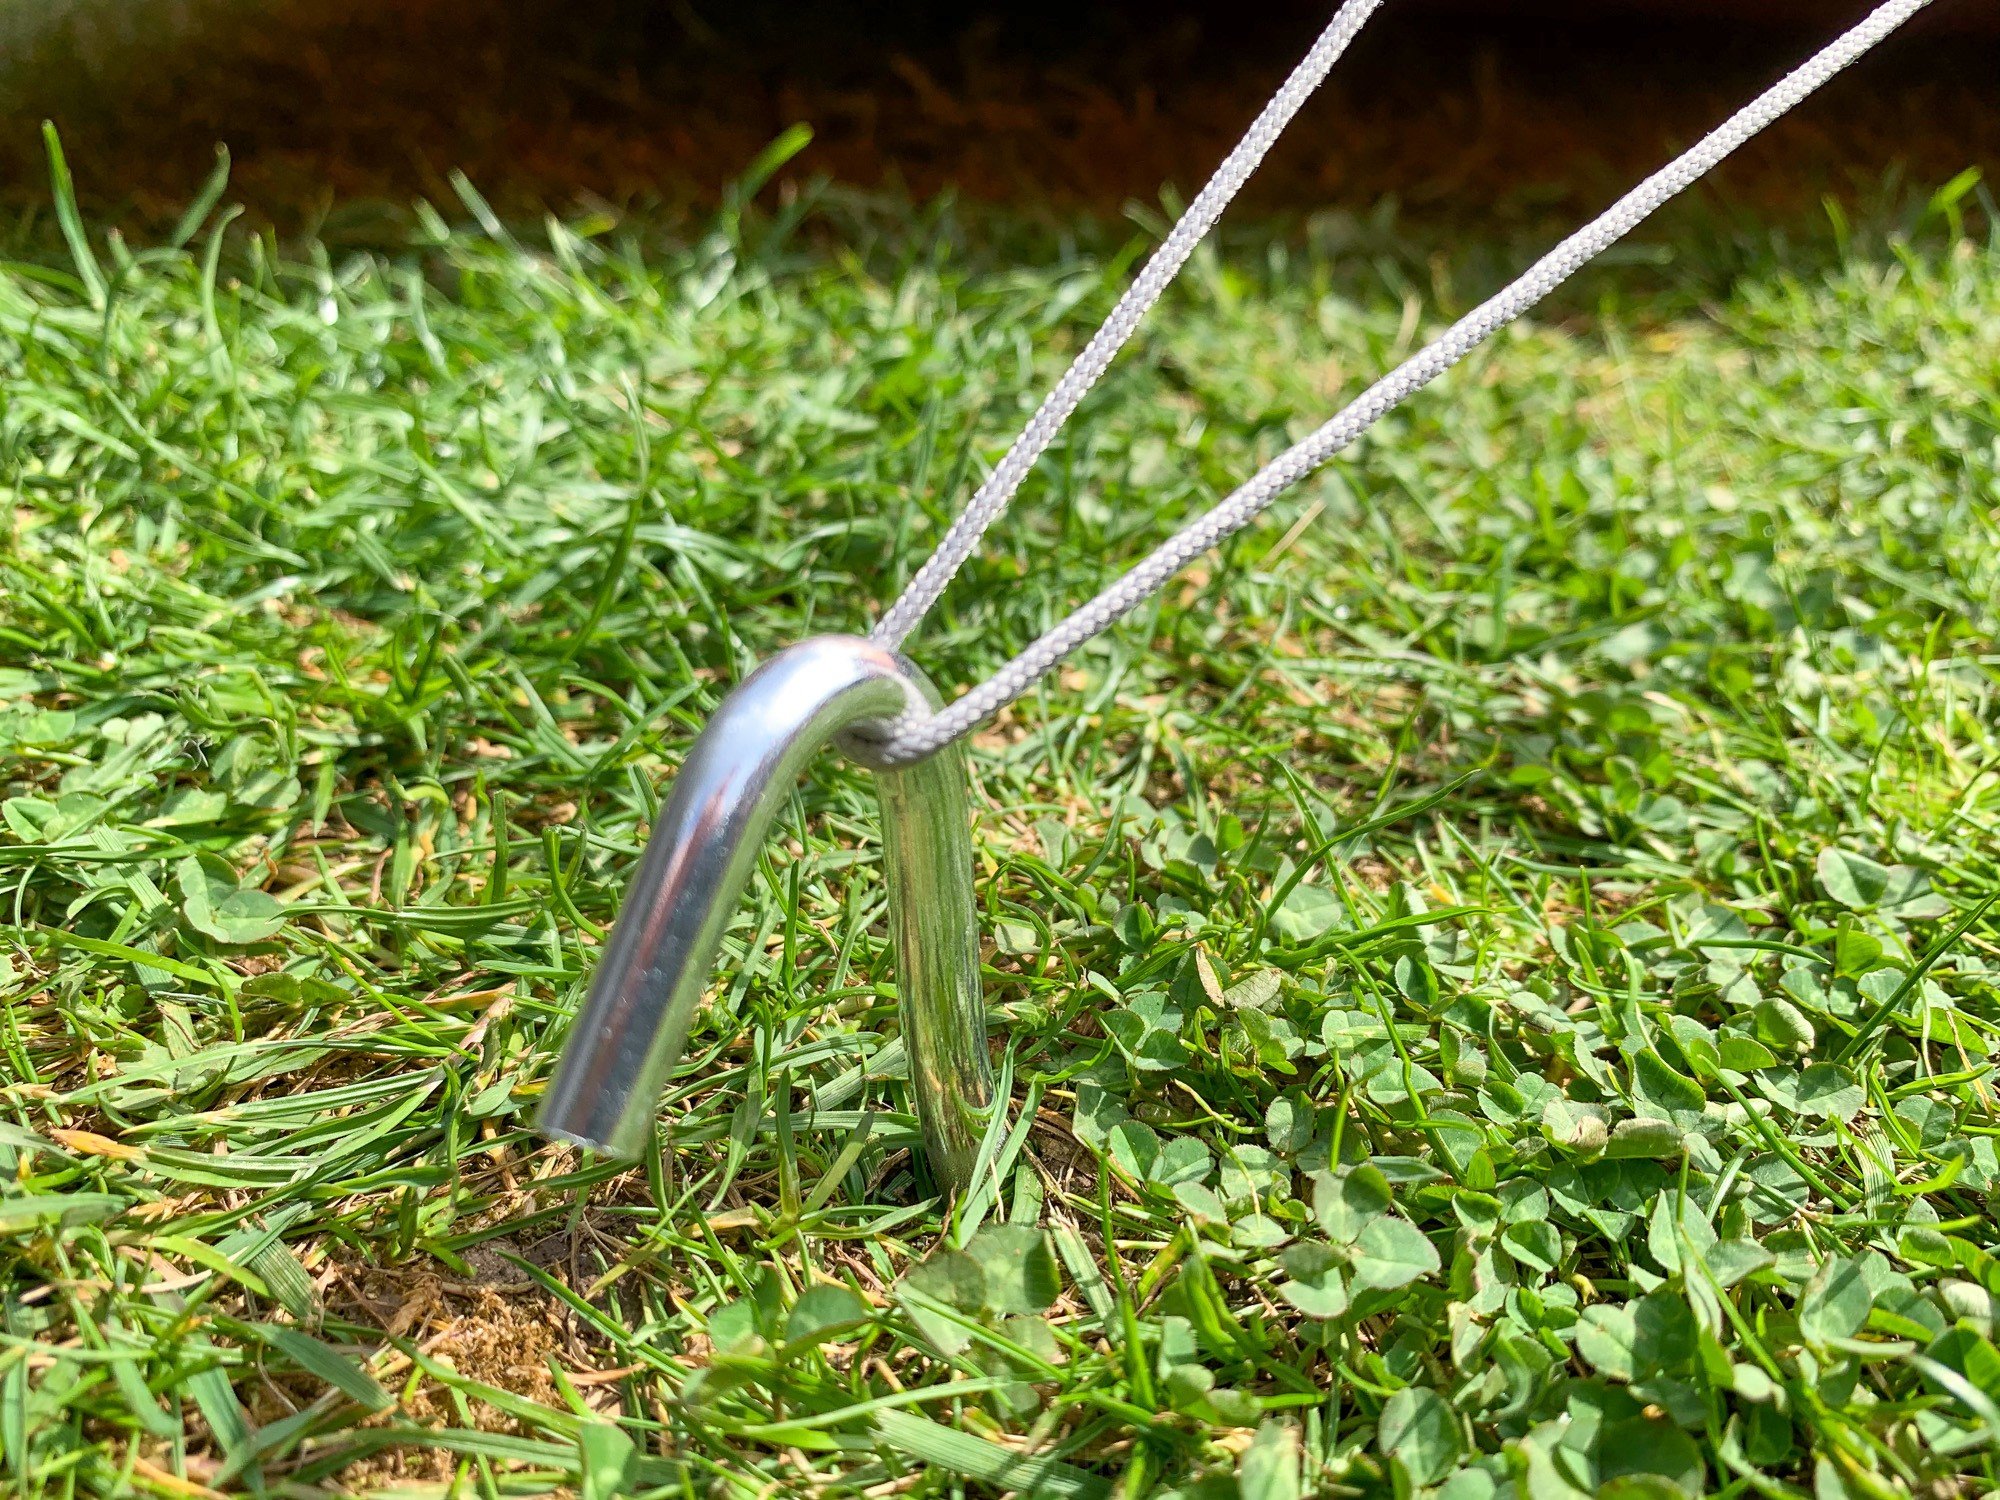 Alloy tent peg in the ground